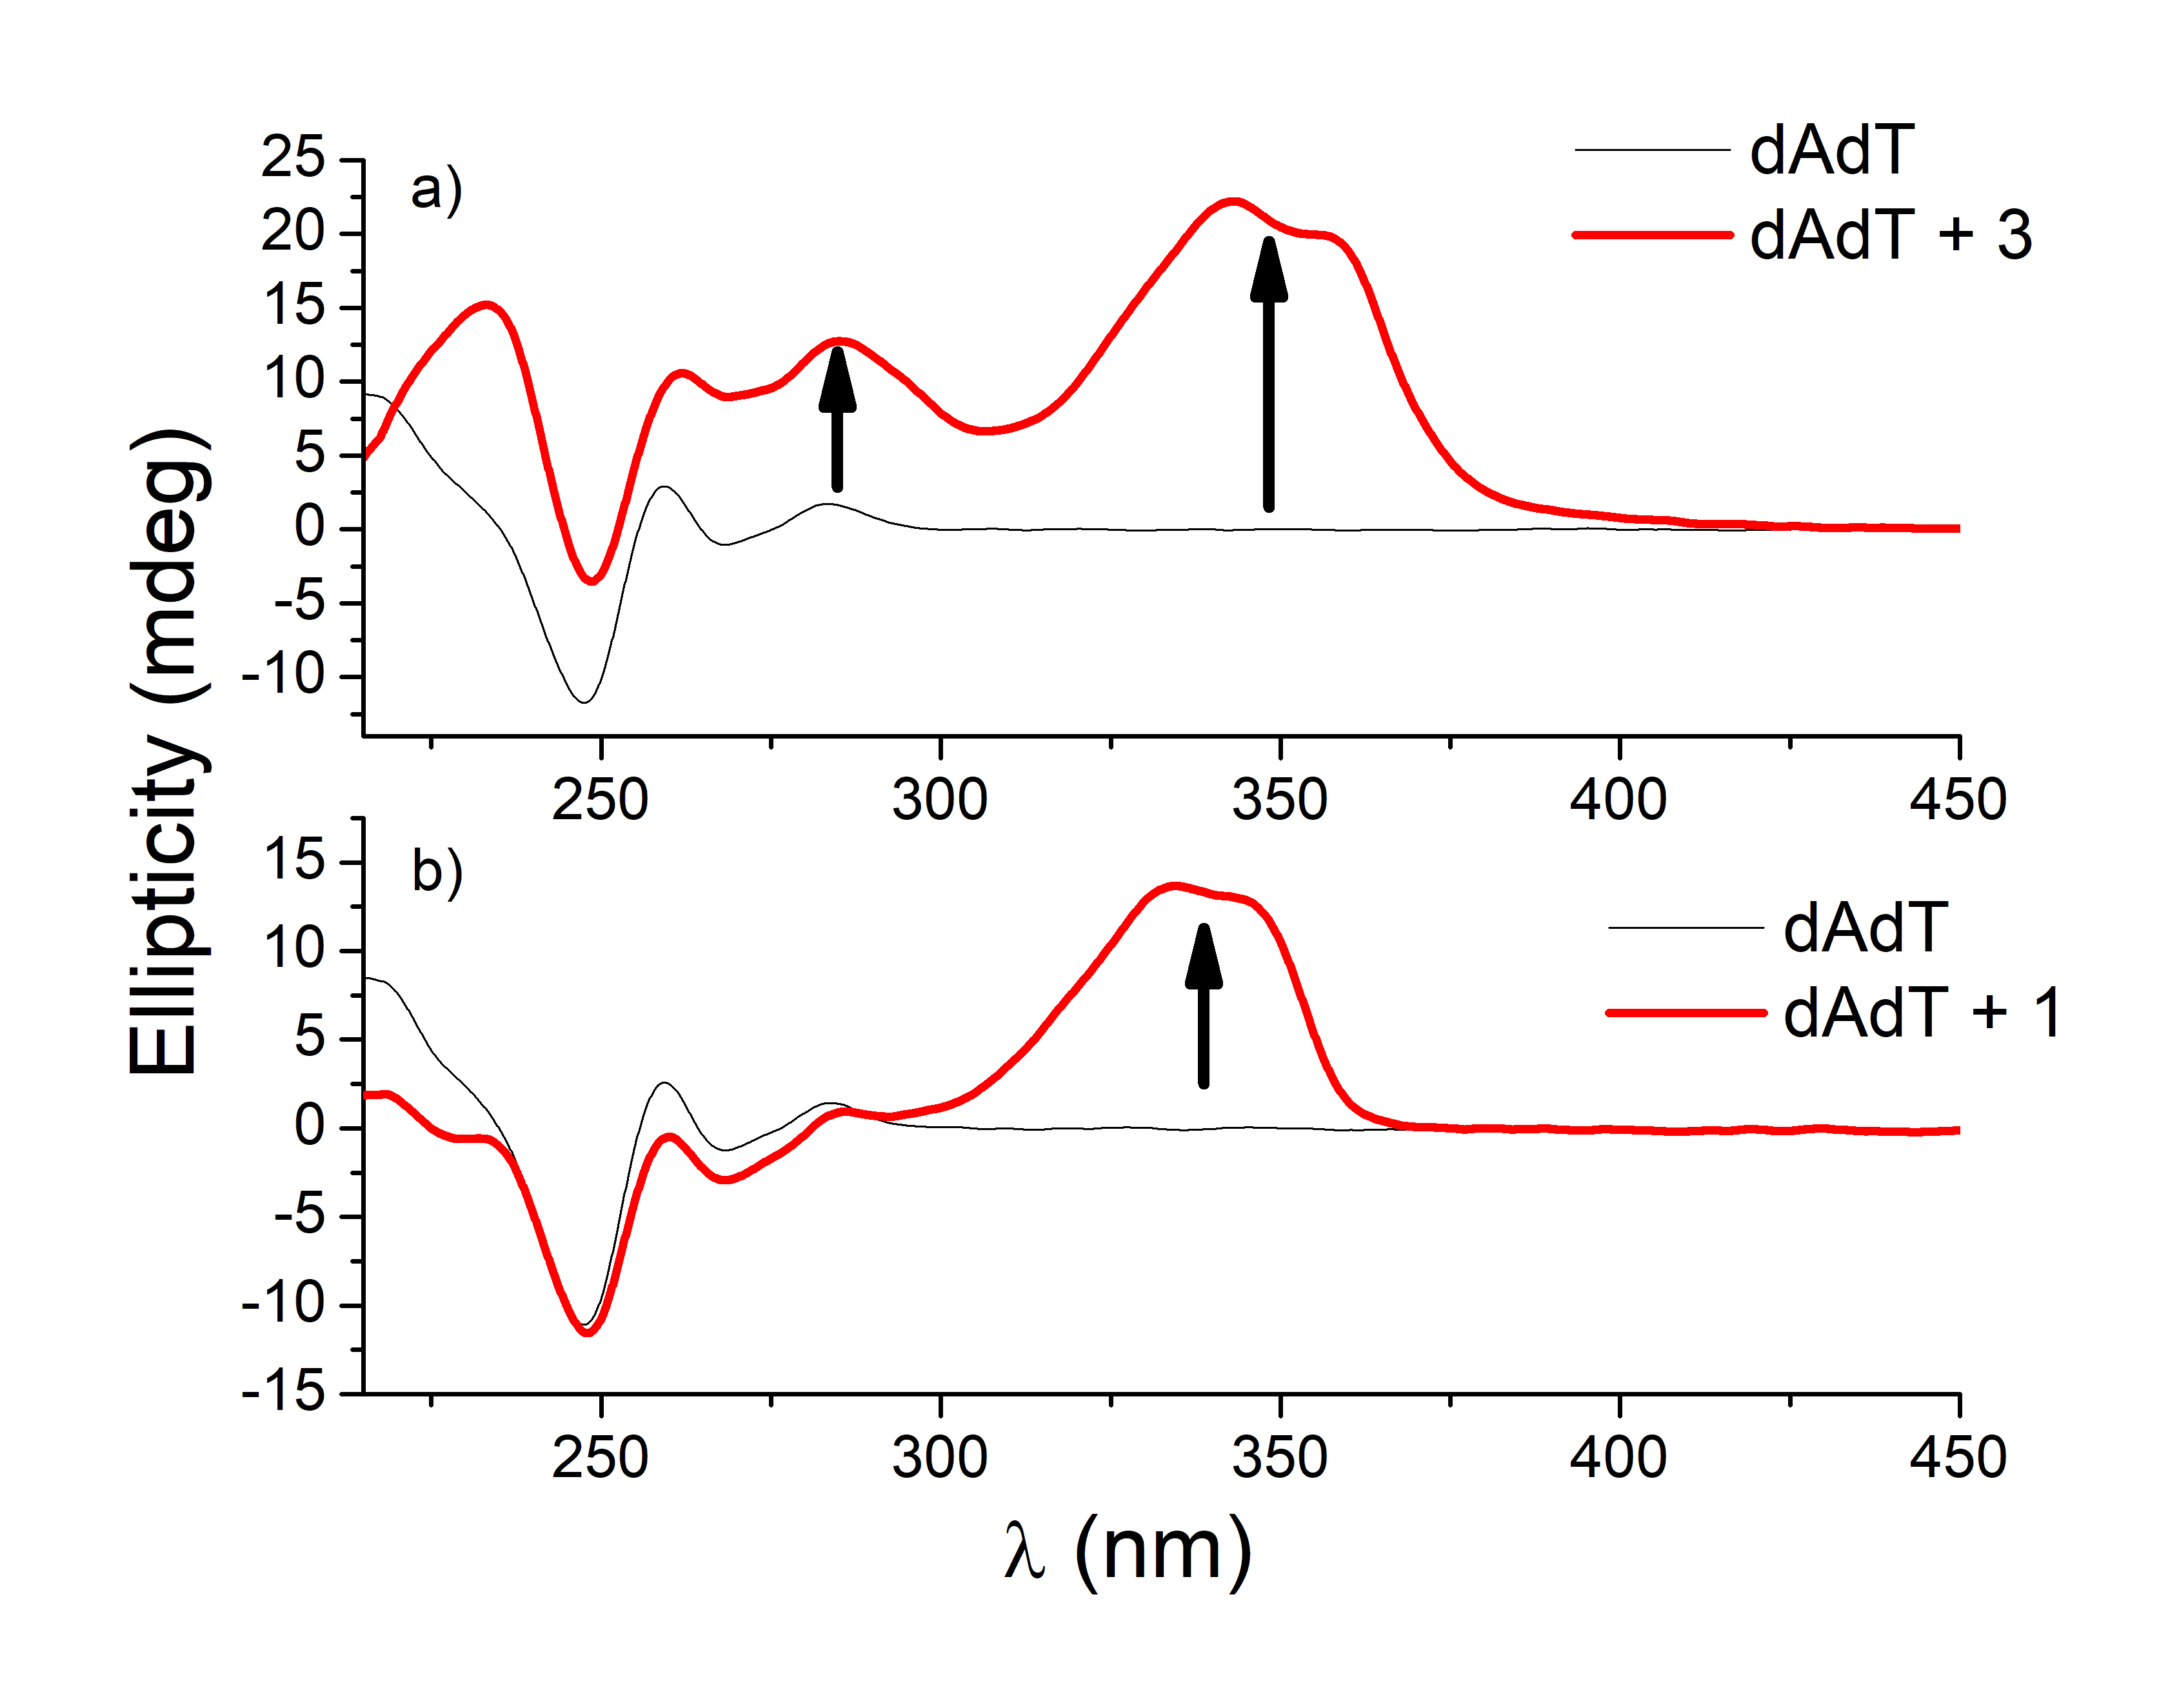 Figure 9. CD titrations of AT-DNA duplex (dAdT) (c = 3.0 × 10−5 mol dm−3) with 3 (a) and 1 (b) at molar ratios r = [compound]/[polynucleotide] = 0.4 and 0.1, respectively (pH = 7.0, buffer sodium cacodylate, I = 0.05 mol dm−3 + 1 mM EDTA).